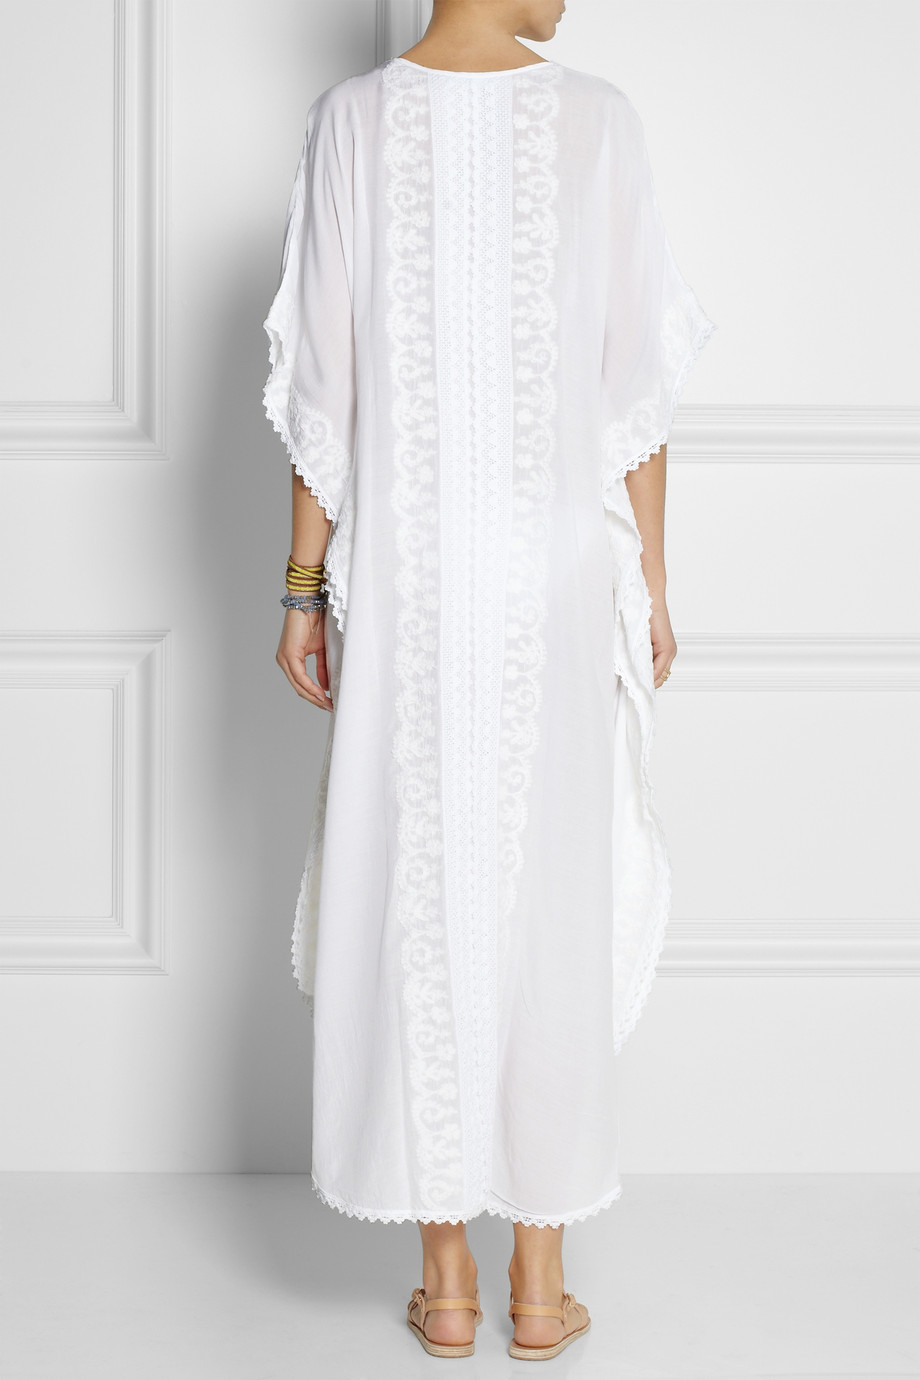 Melissa odabash Robyn Embroidered Voile Kaftan in White | Lyst